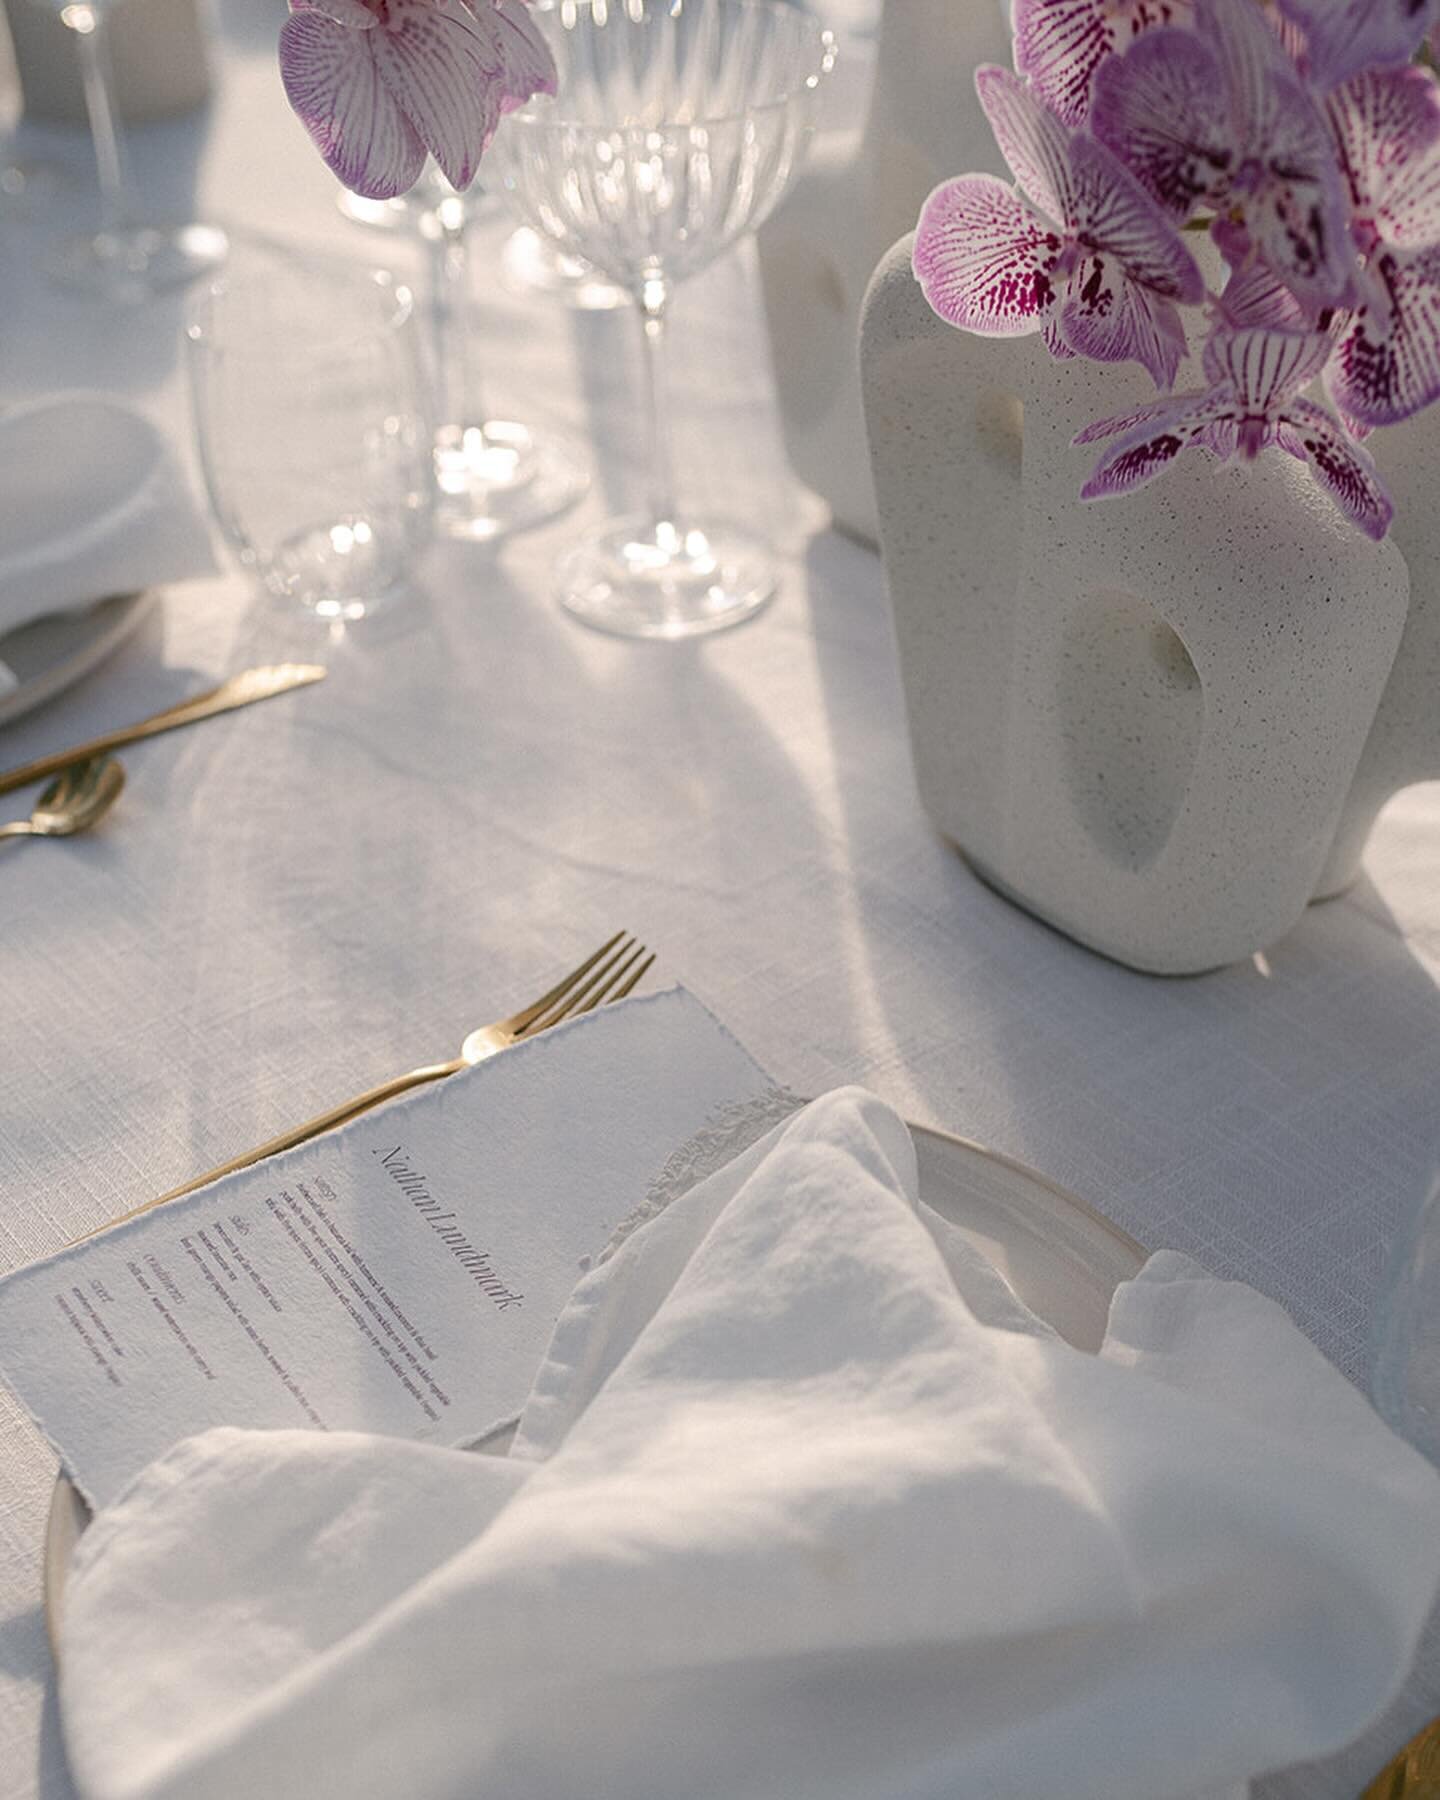 Delicate table moments styled by yours truly for Ash &amp; David x

Planner/Stylist @hausofhera__ 
Florist @mrsgibbonsflowers 
Photography @reneegreencreative 
Videographer @sommarfilms 
Celebrant @gracelewincelebrant 
Venue @goldcoastfarmhouse 
Cate